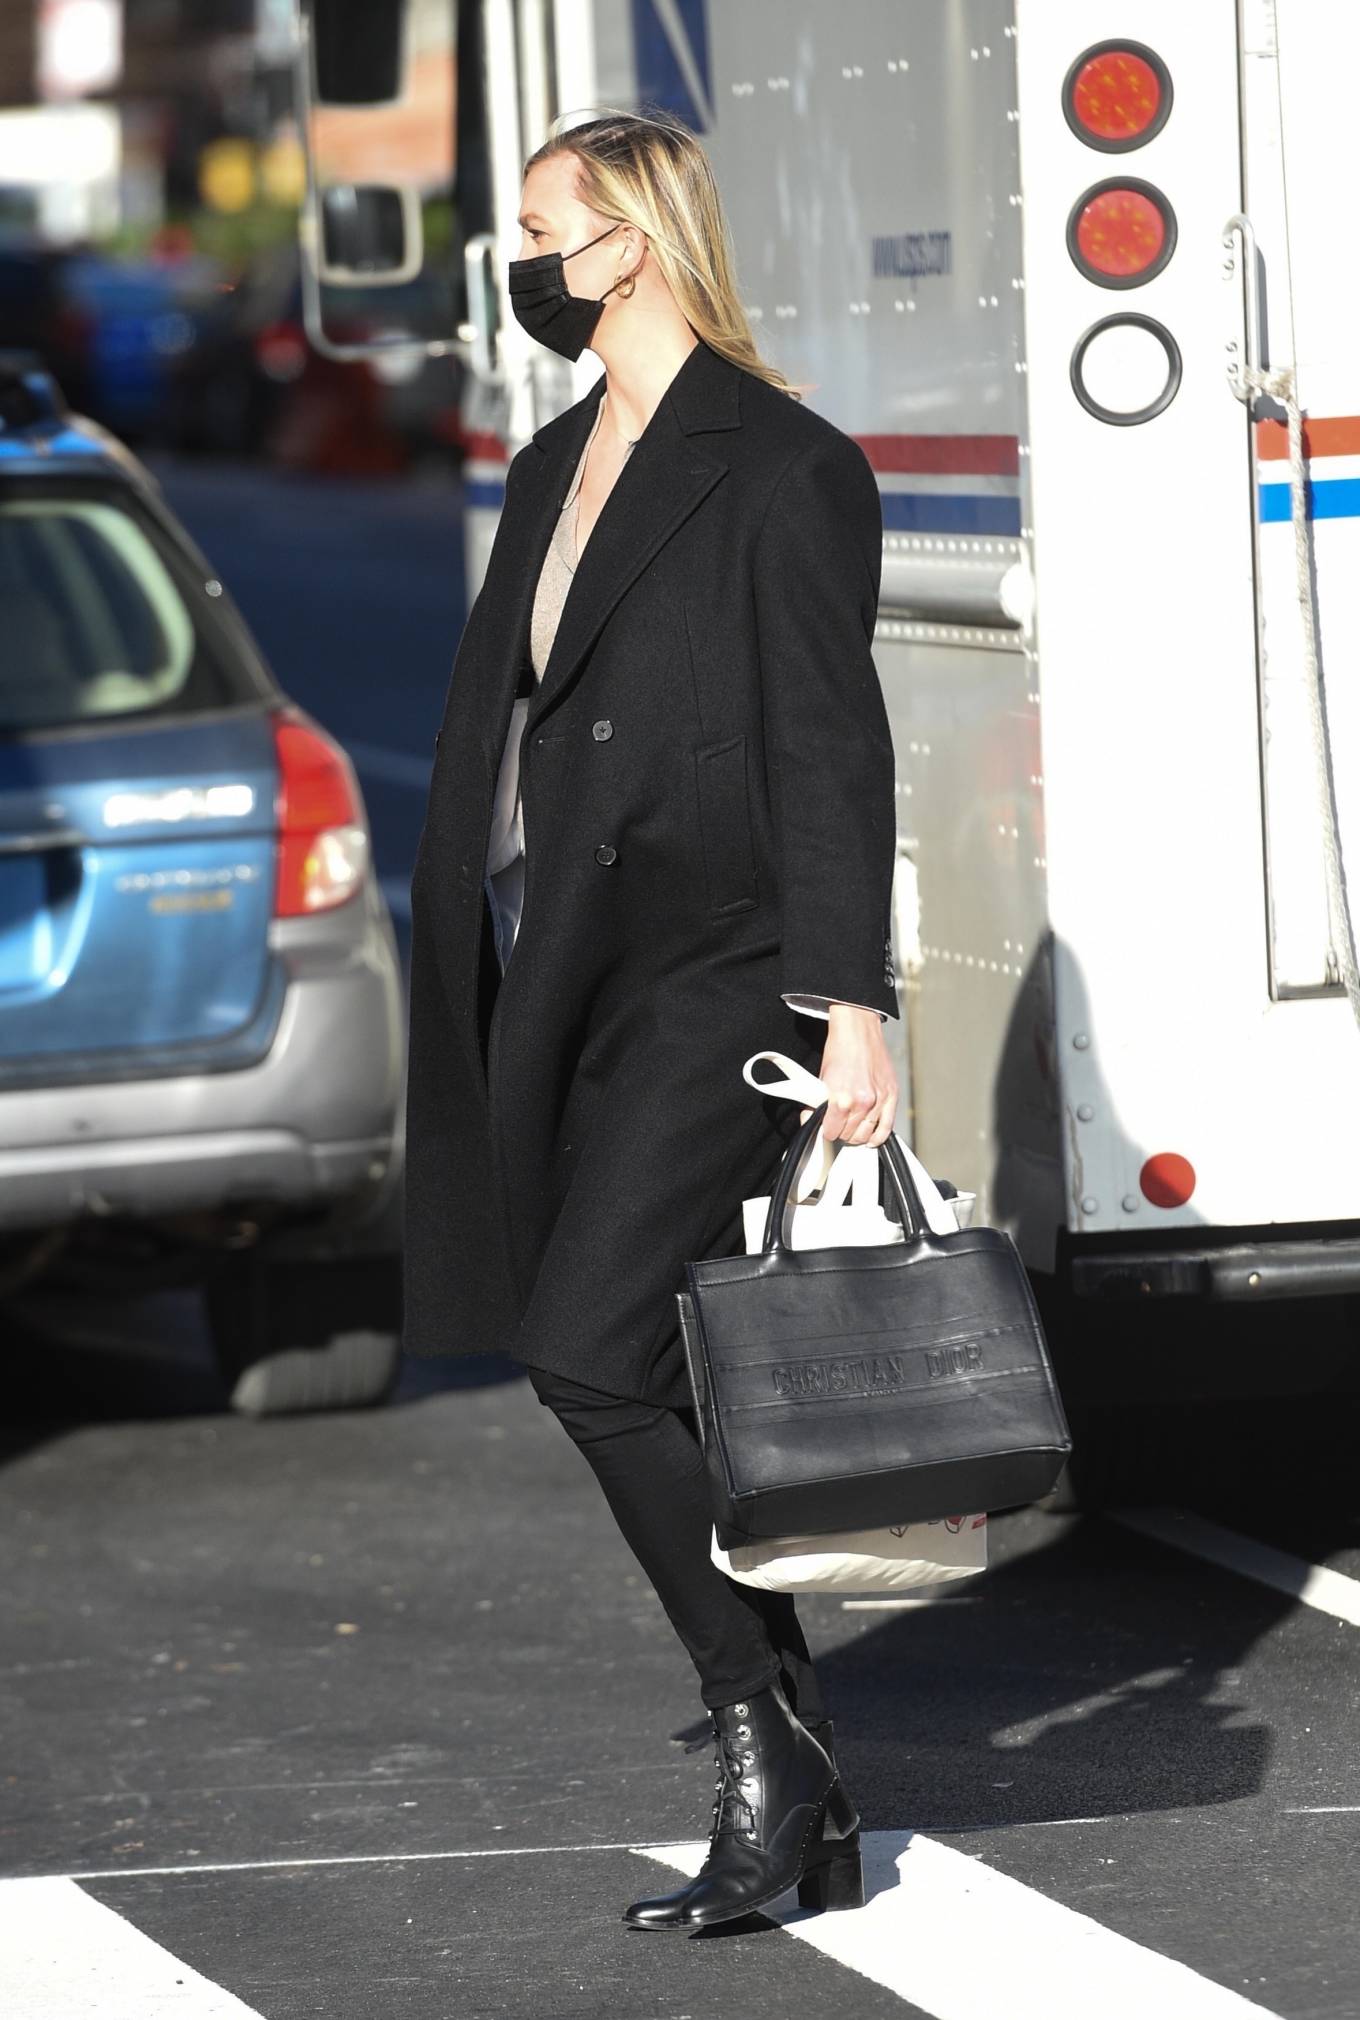 Karlie Kloss – Out and about in SoHo